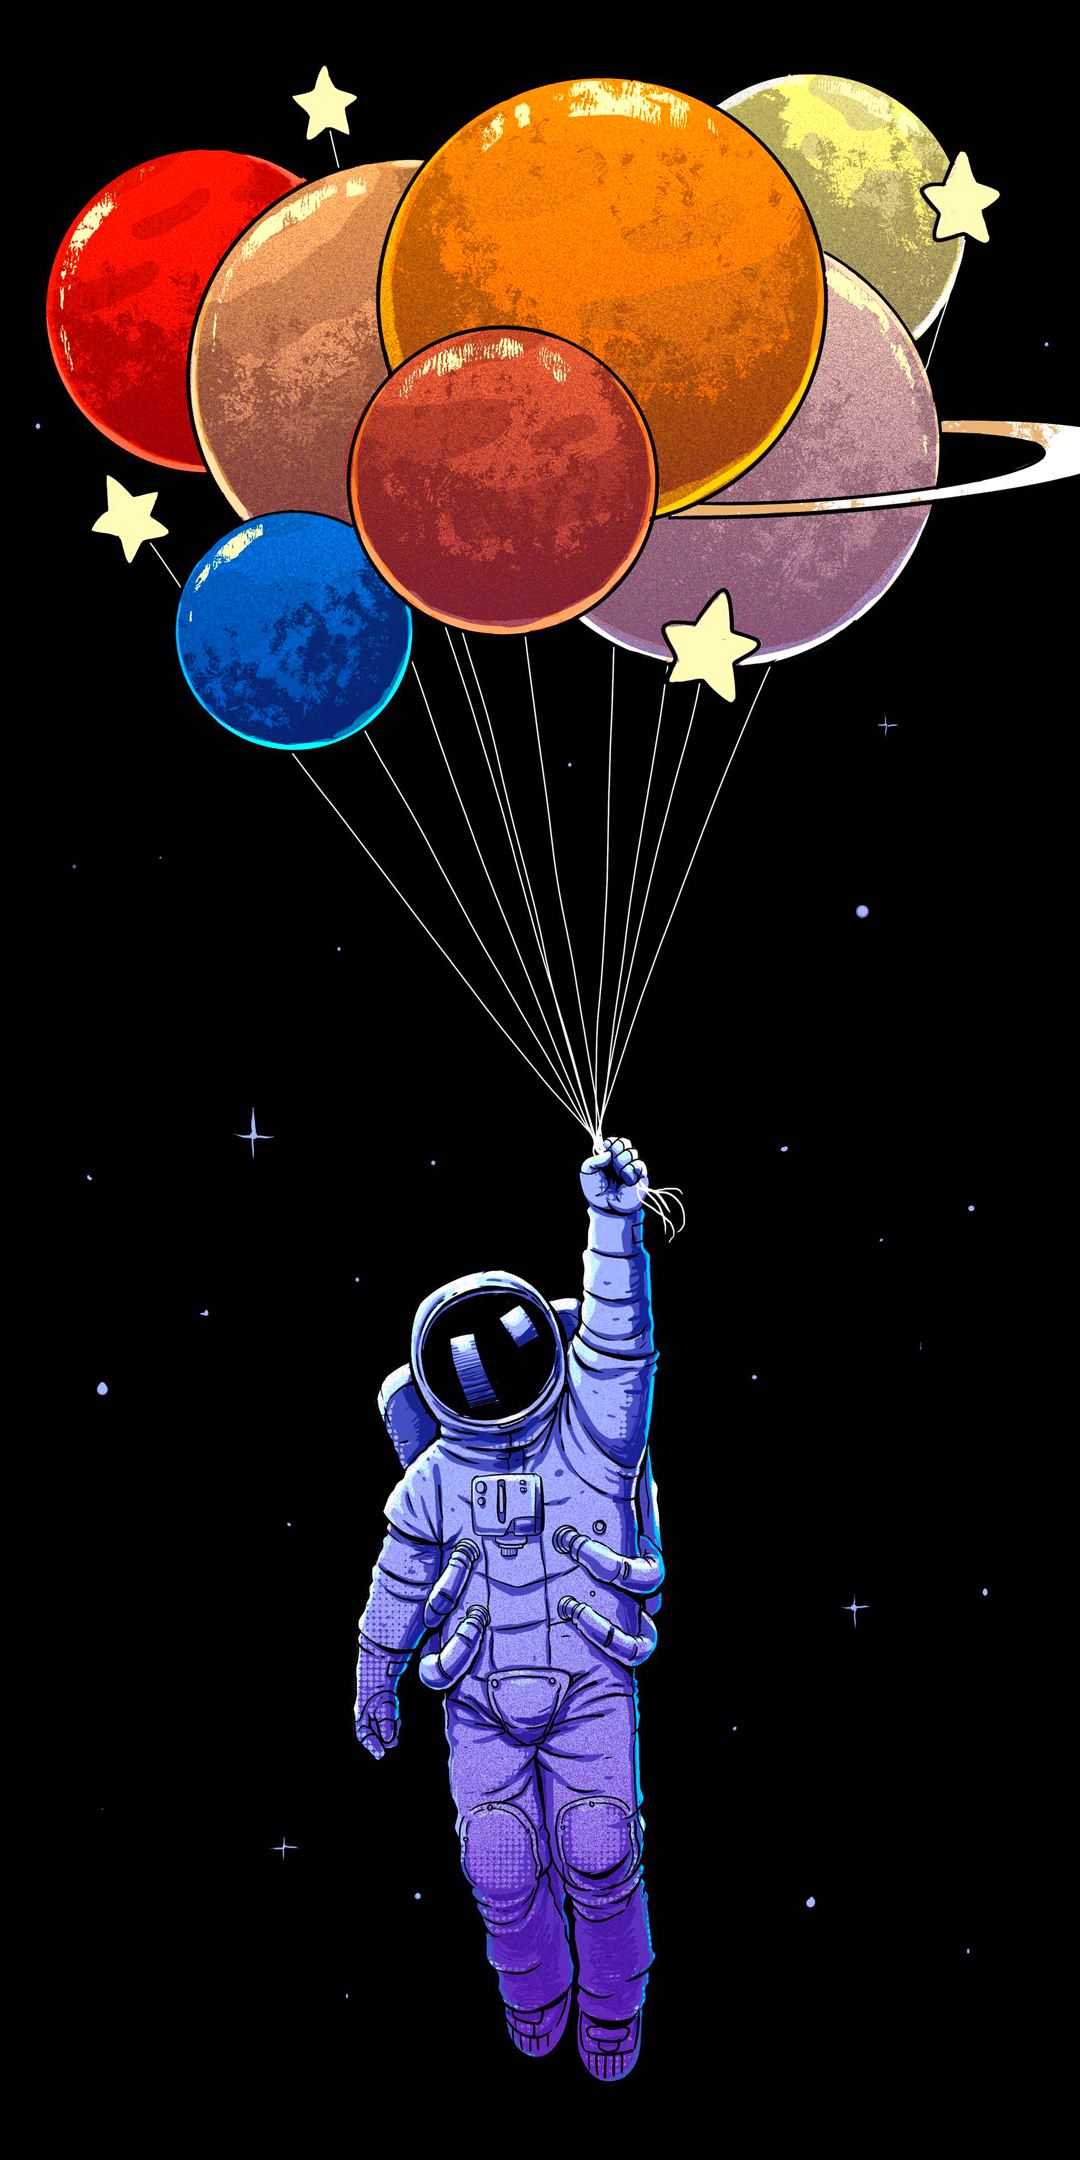 astronaut, sci fi, spacesuit, balloon wallpaper for mobile